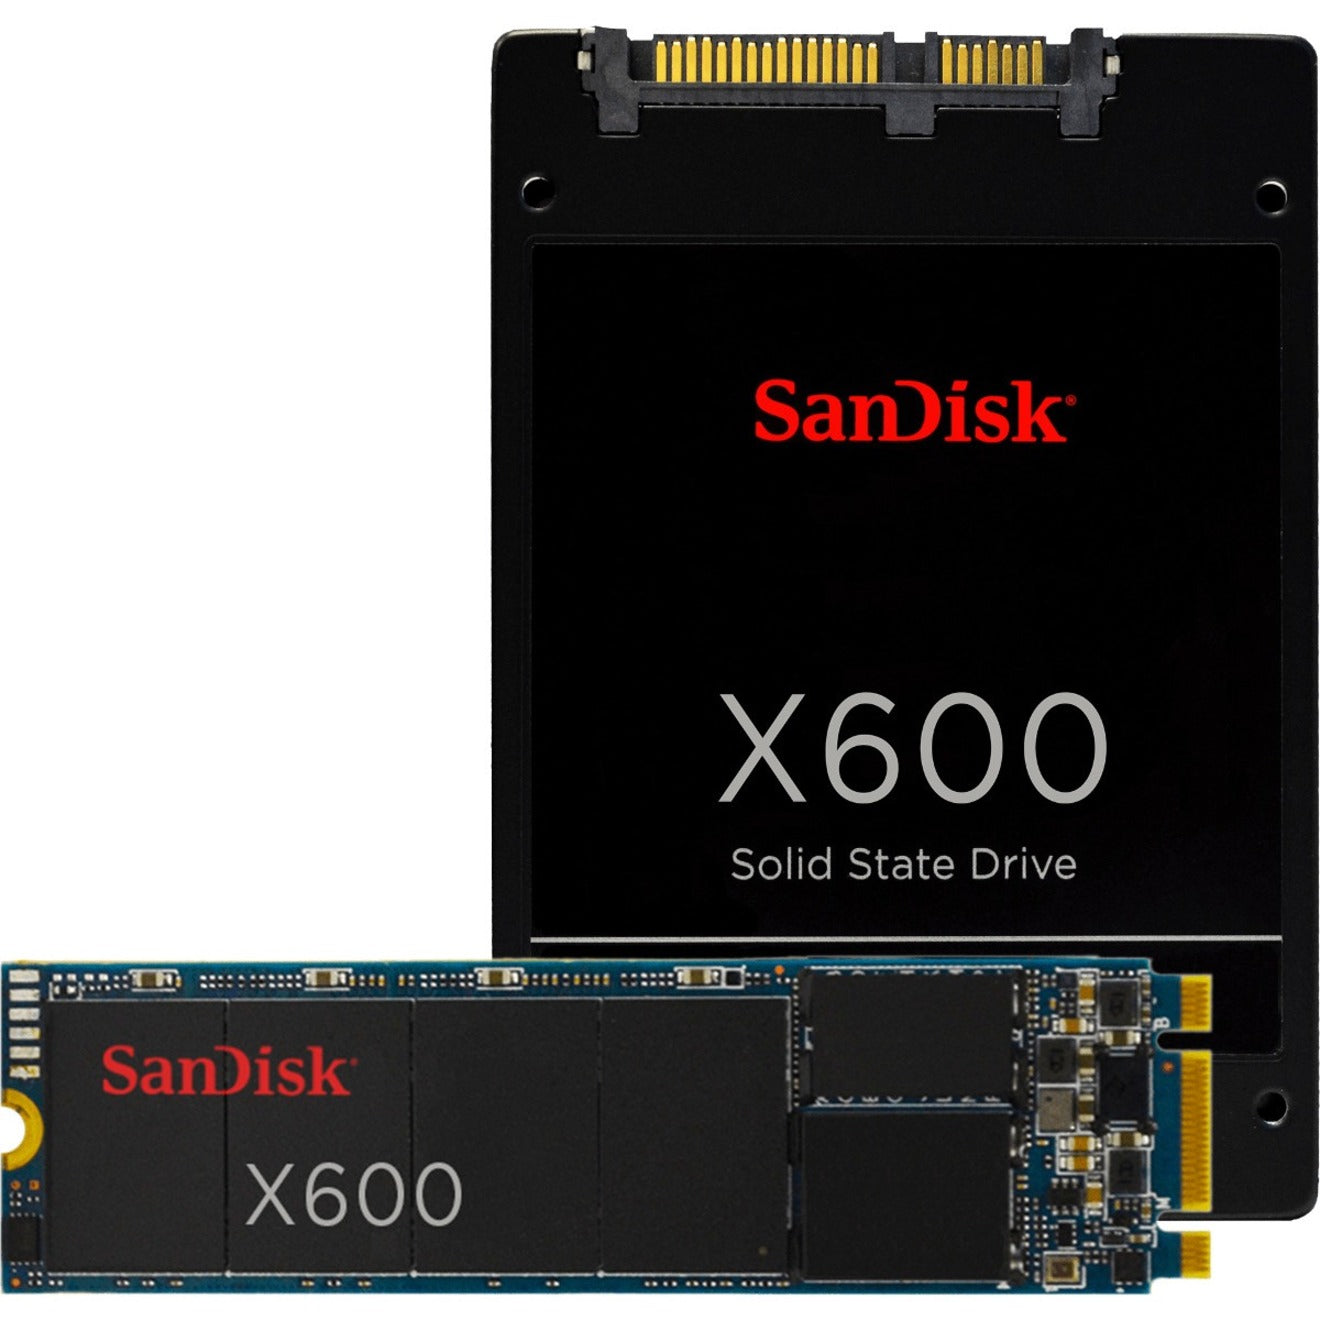 SanDisk SD9SB8W-128G-1122 X600 128GB 2.5 SATA SSD, High Performance and Reliable Storage Solution